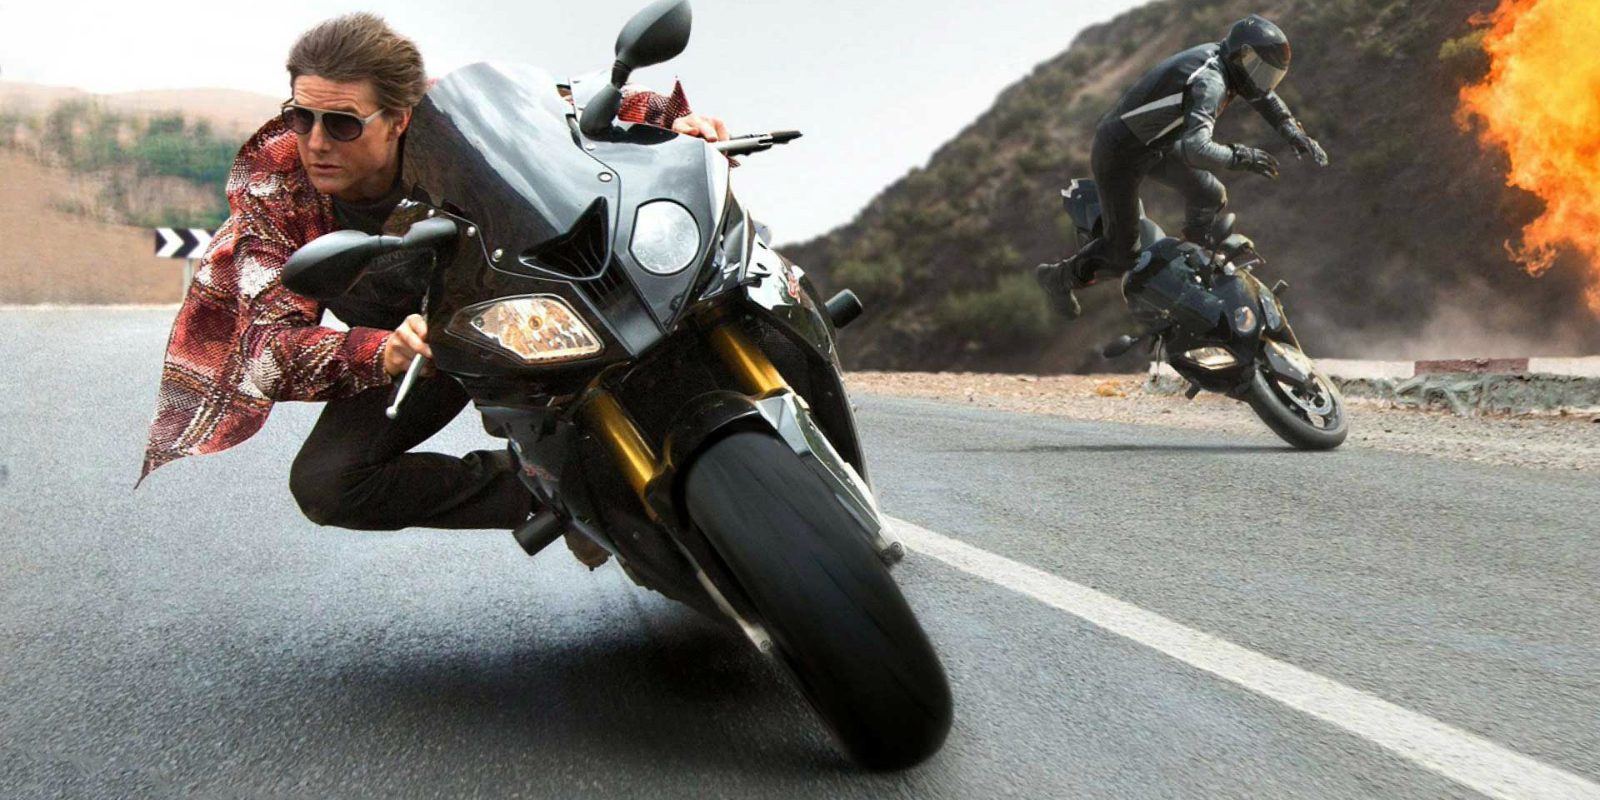 'Mission Impossible 7' Delayed to 2023, Paramount to Push Back More Titles